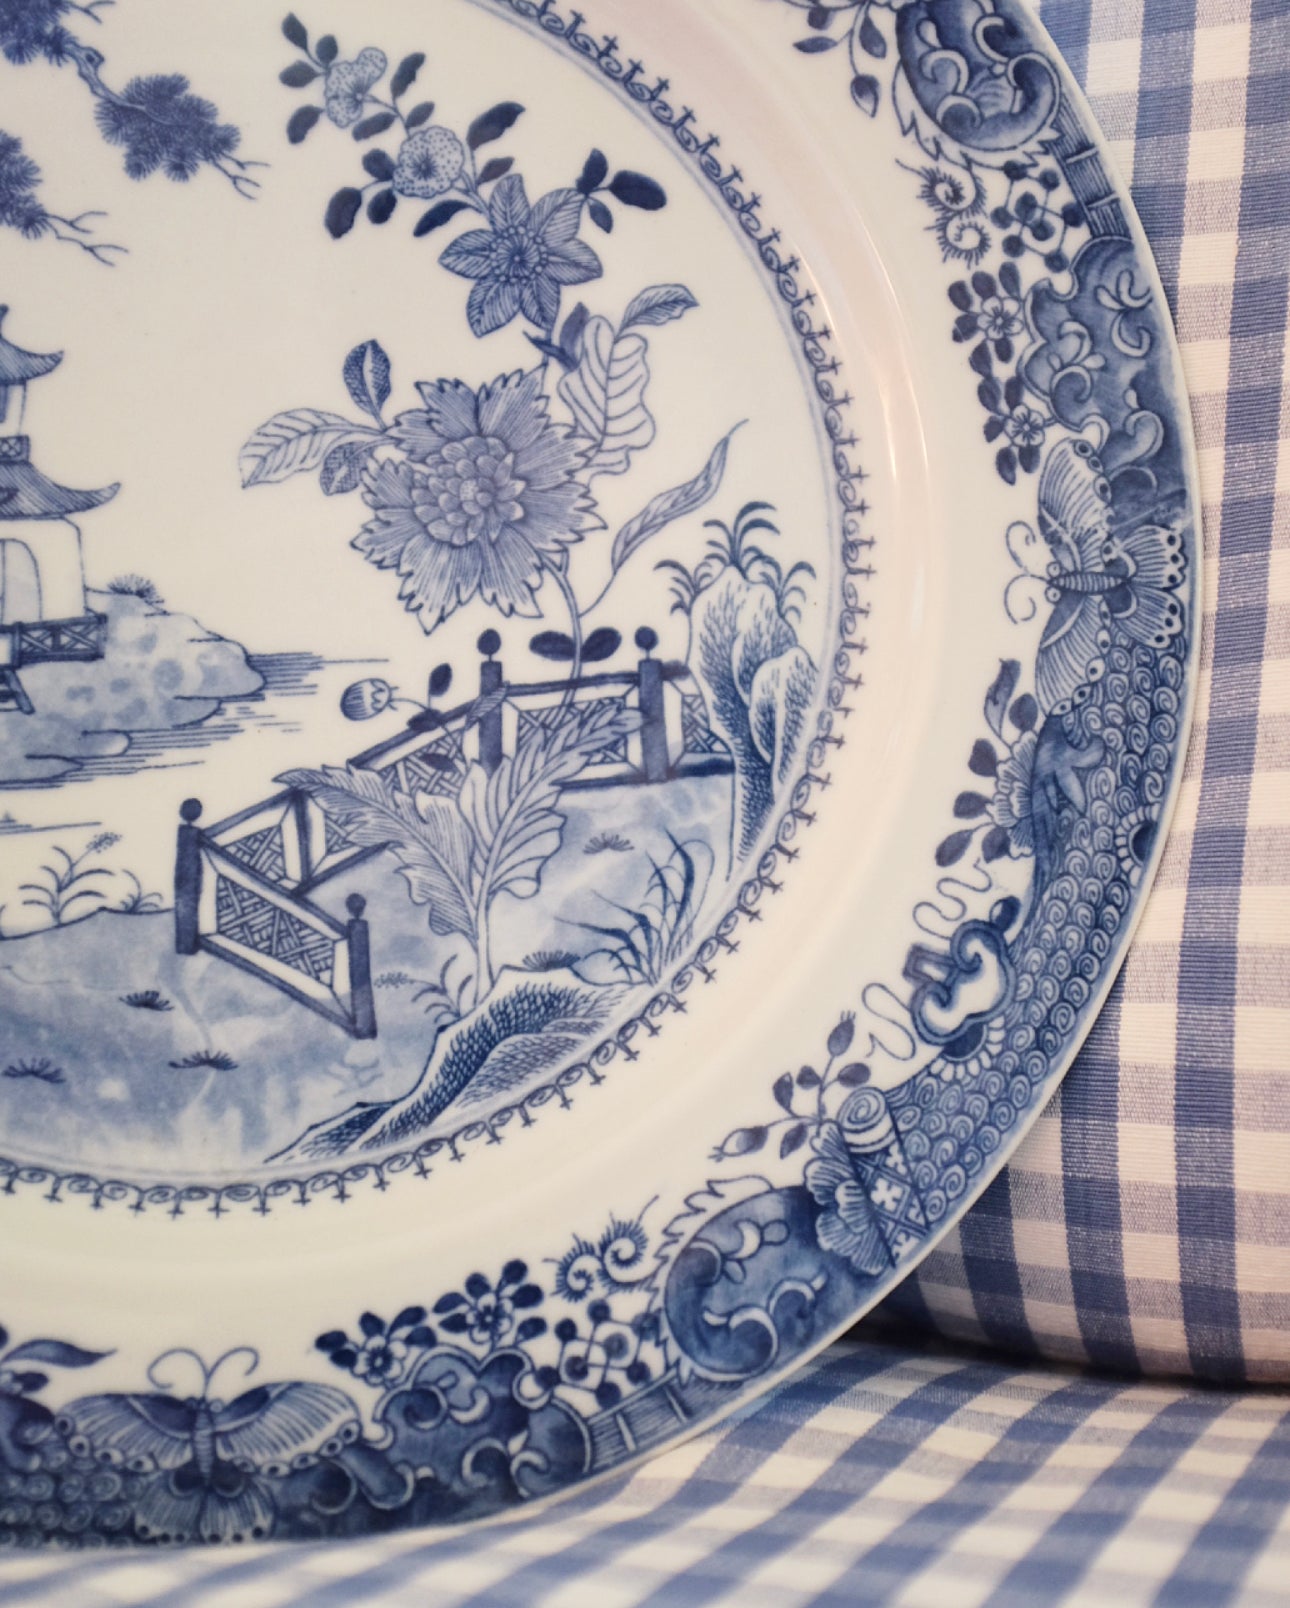 Blue and White Chinoiserie Round Platter